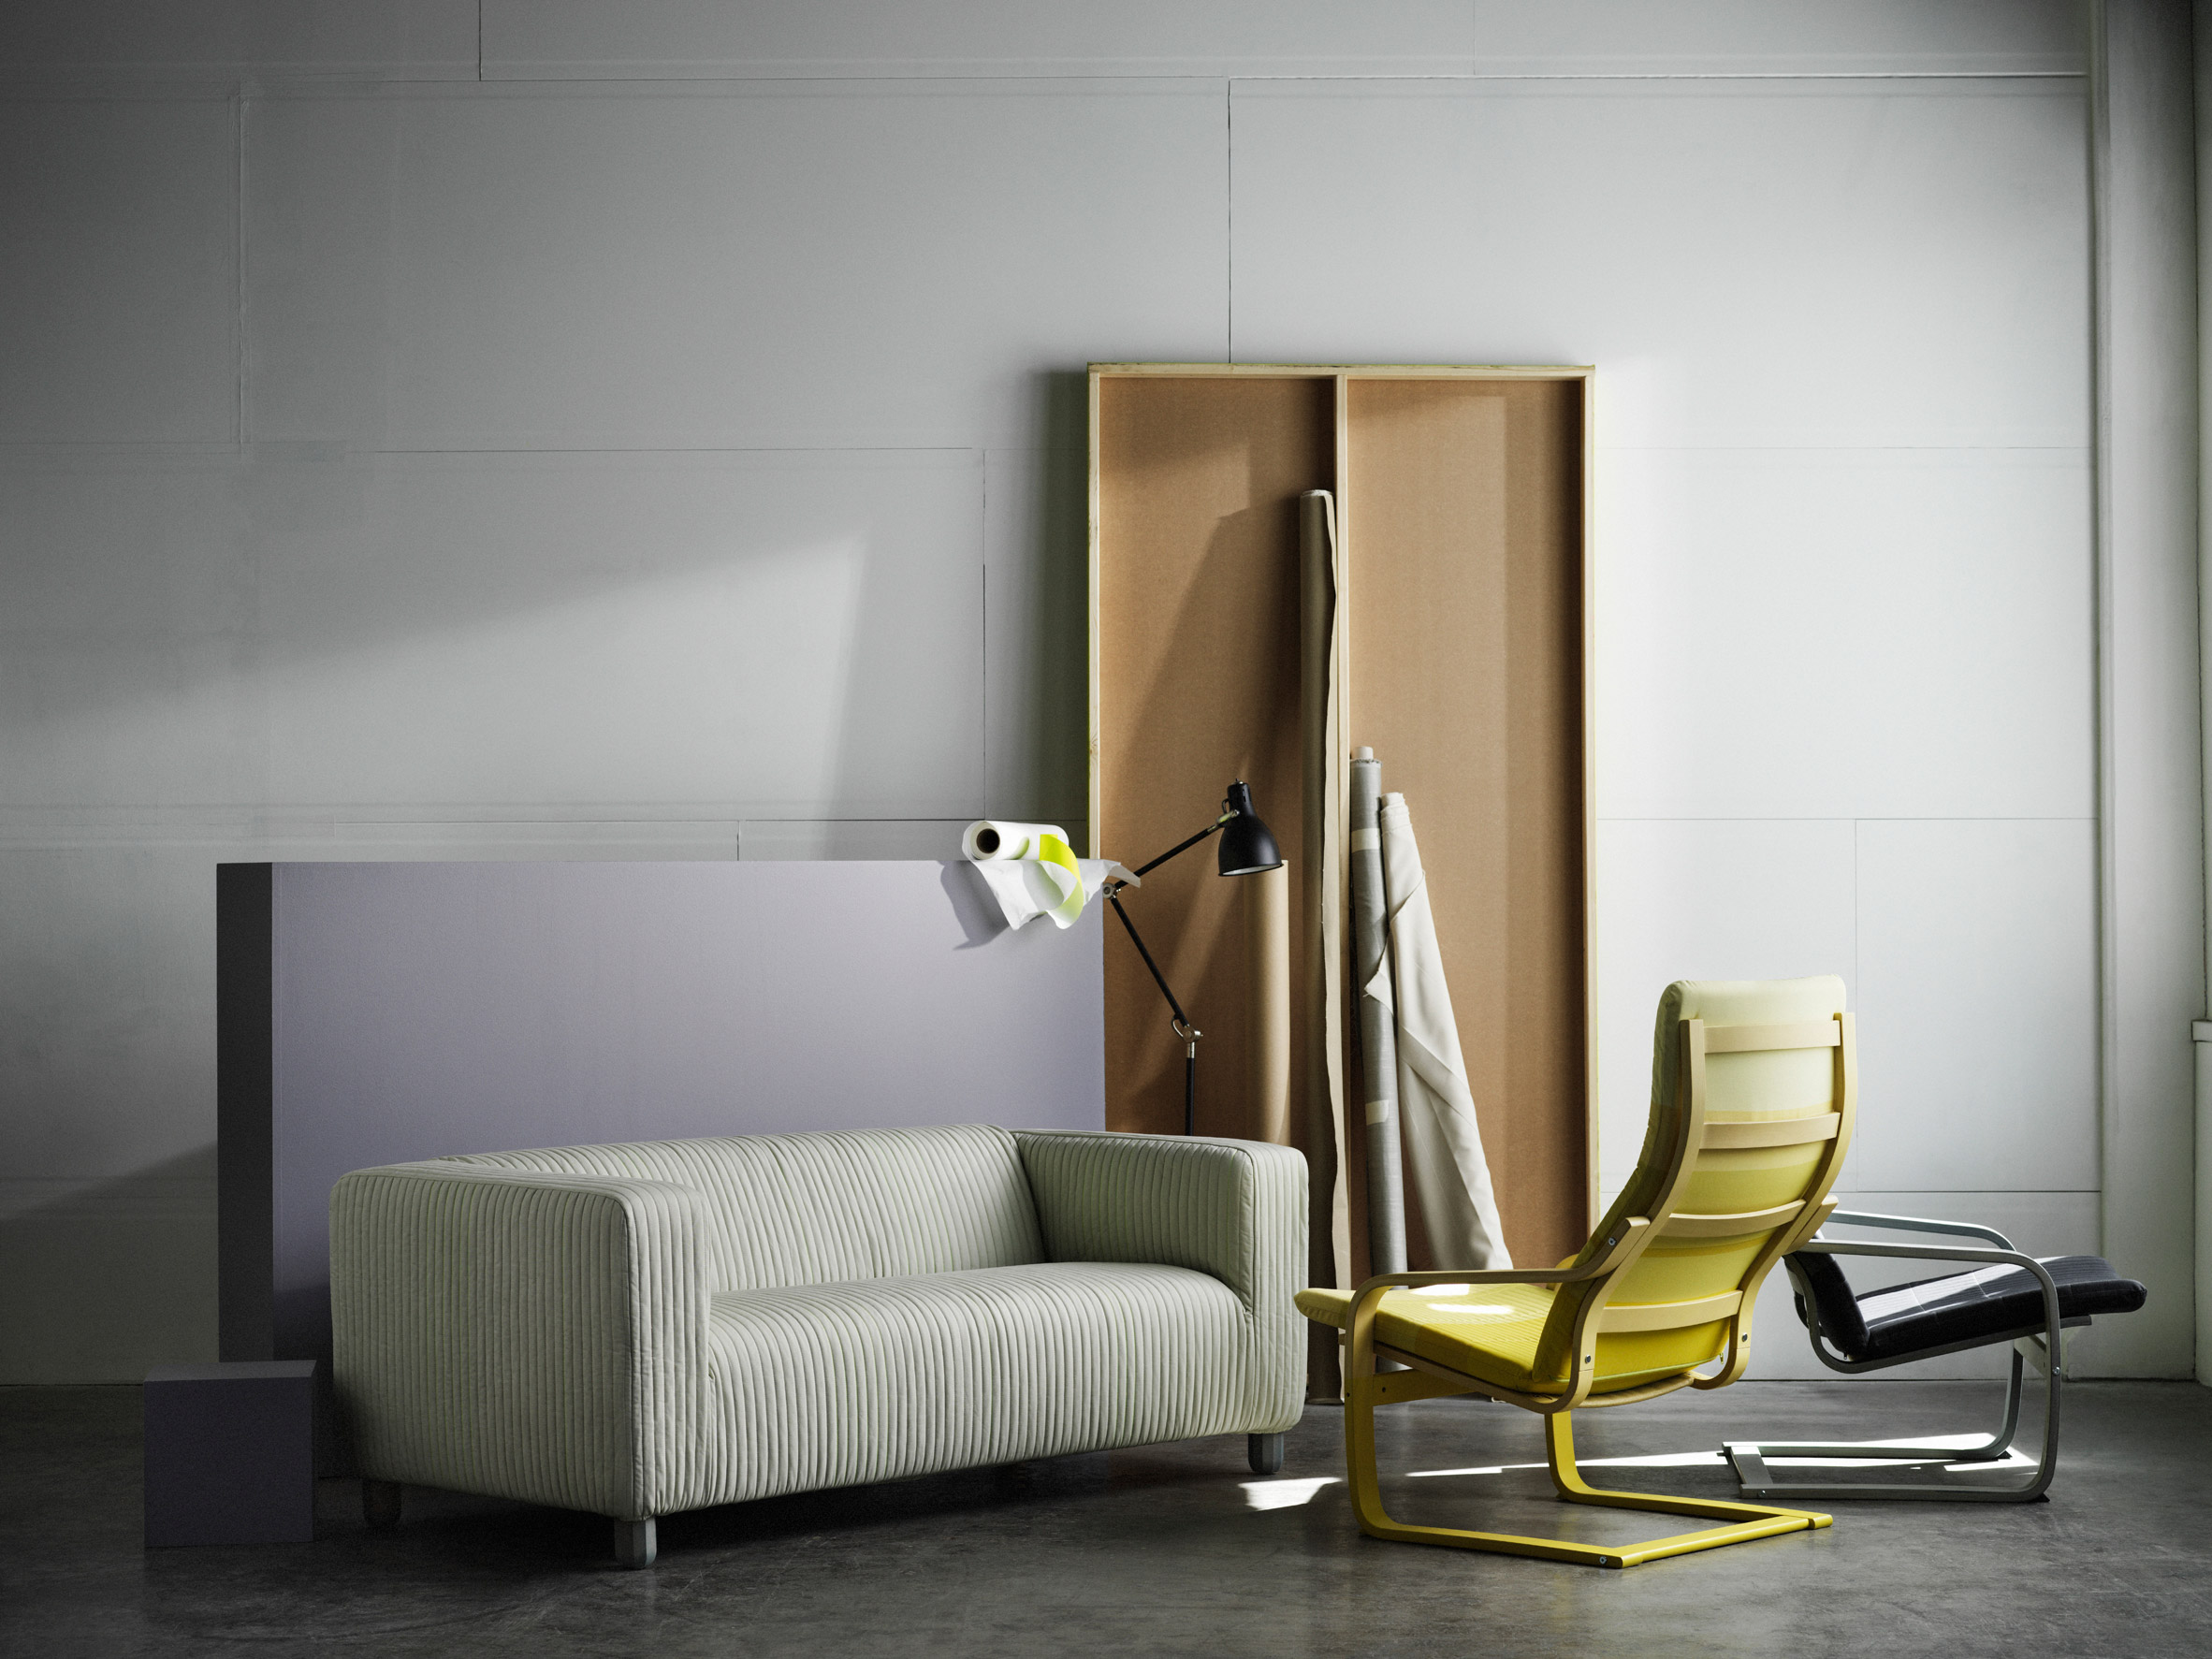 IKEA asks Scholten & Baijings to hack two of its most popular furniture designs